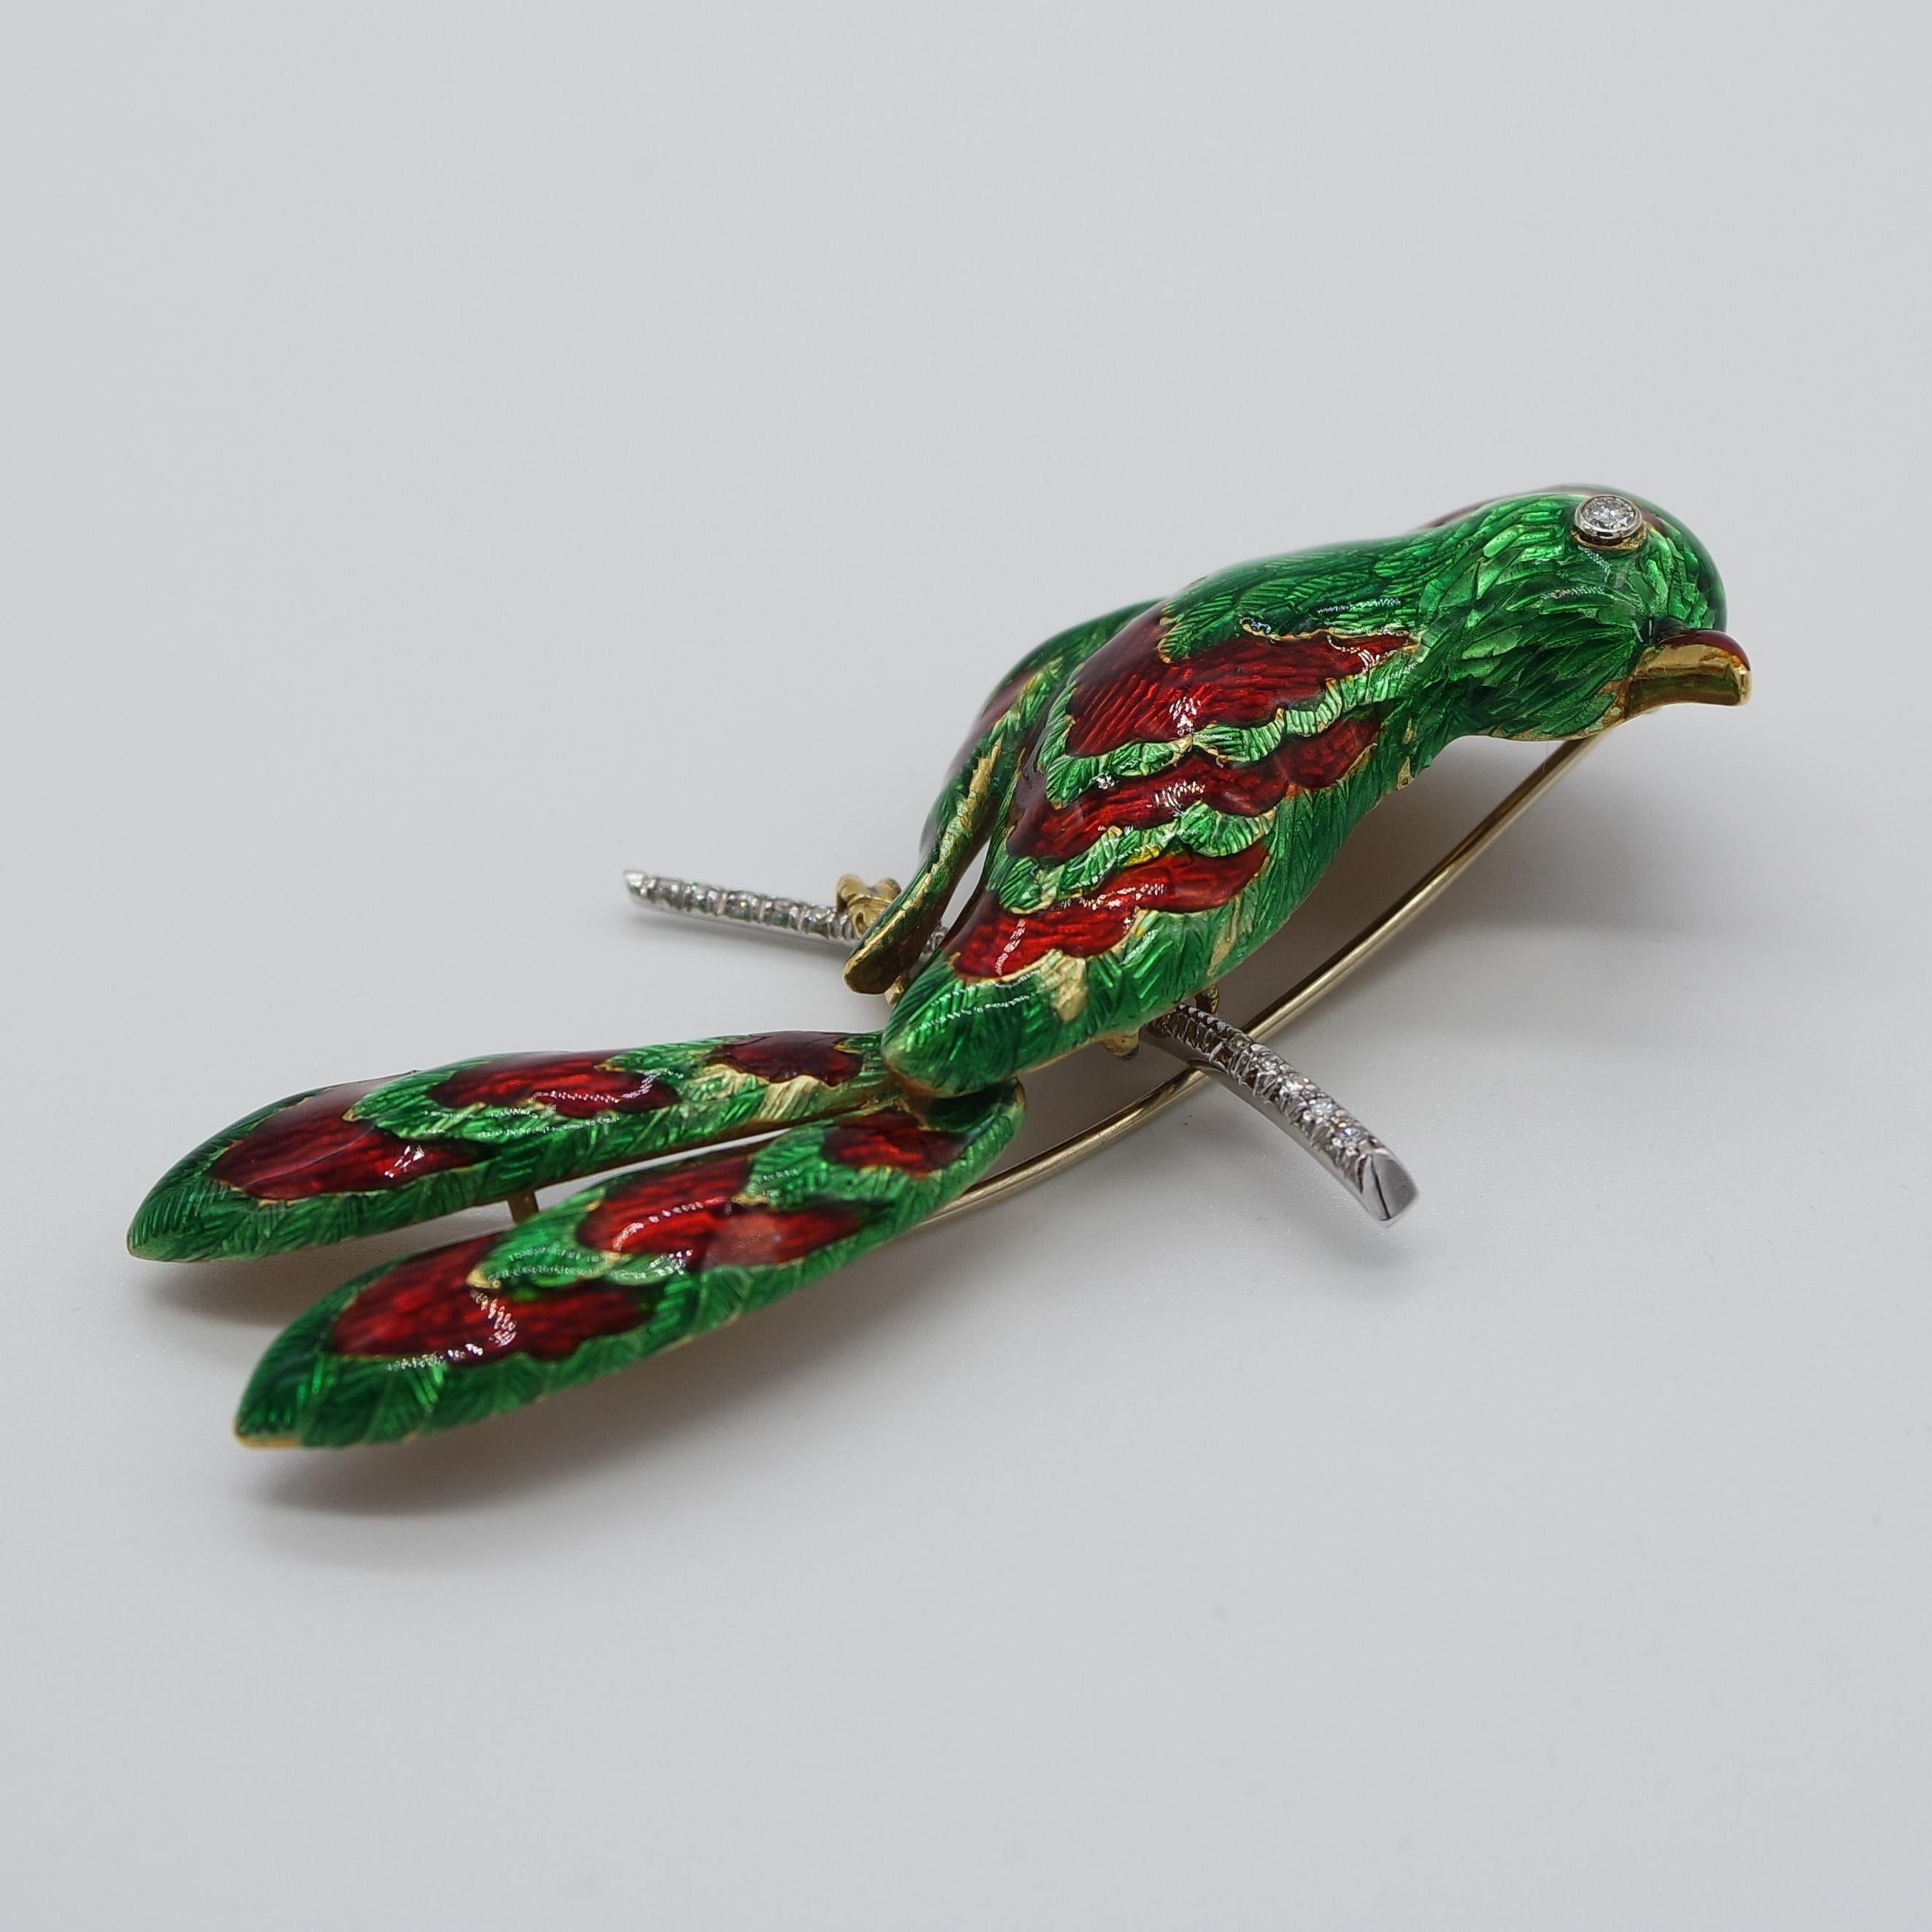 This brooch, in 18 karat, yellow and white gold  depicts a splendid tropical bird, and more specifically a Paradise Bird  with green and red  guilloché enamel decorations and small brilliant cut diamonds.
It has a single clasp. 
The position of the